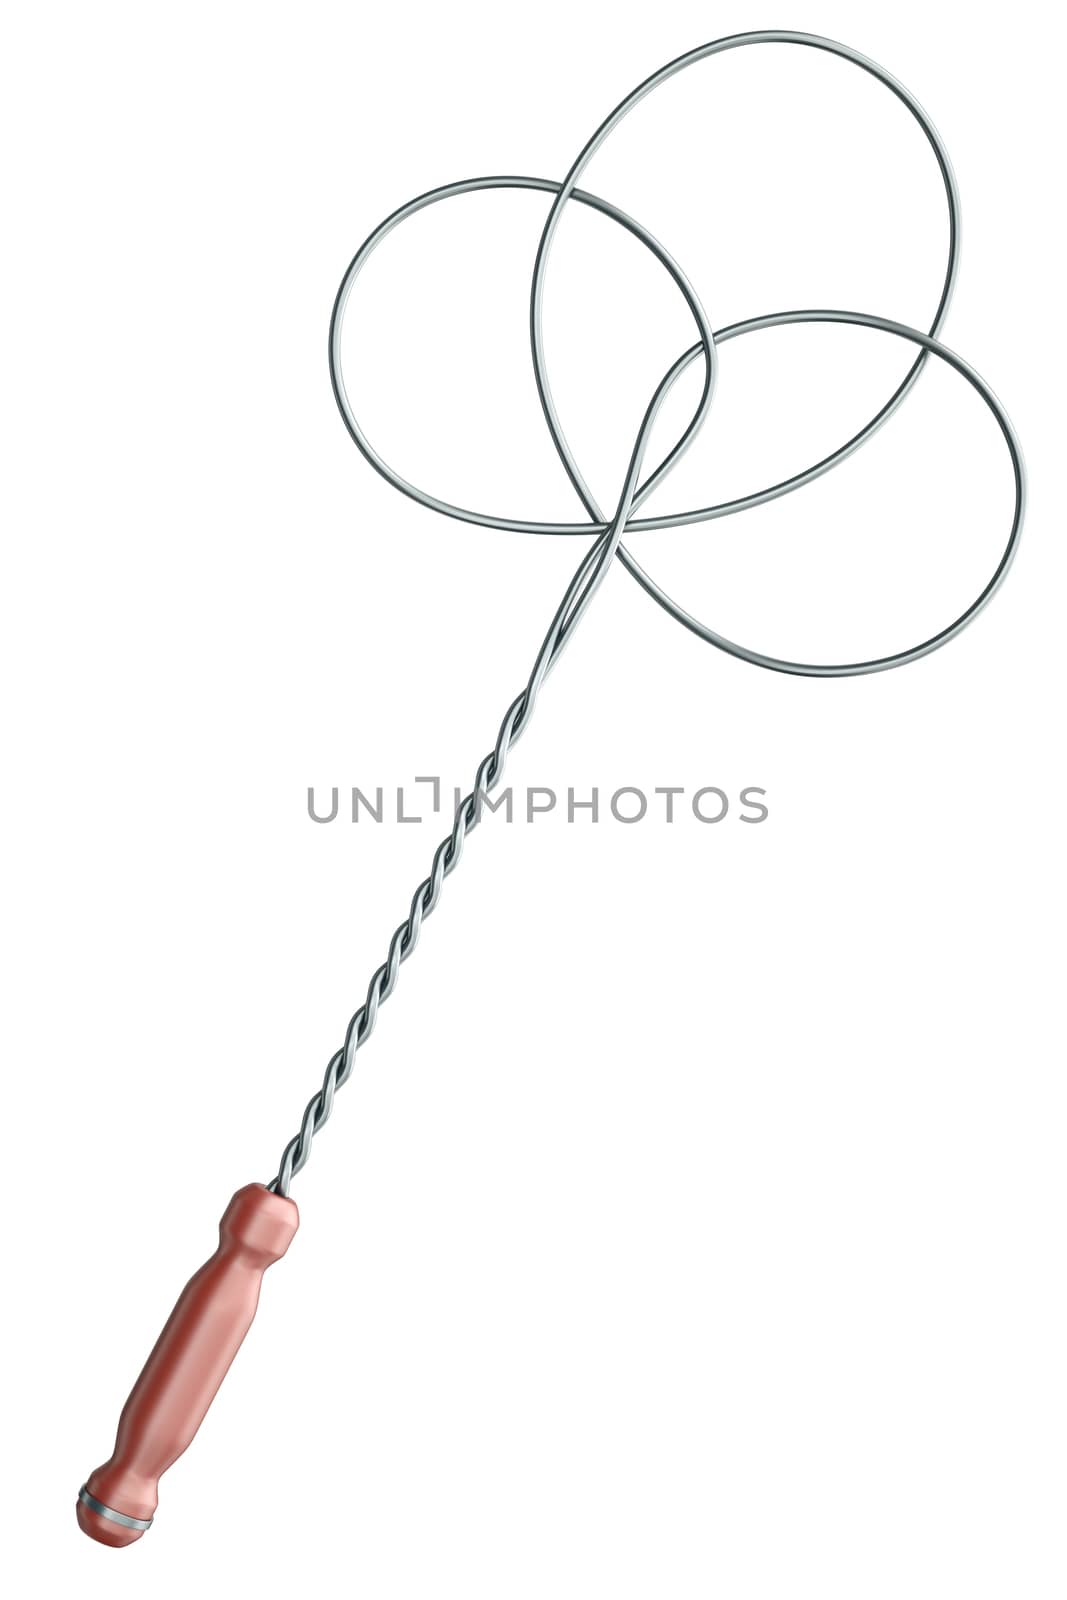 Carpet beater by bayberry